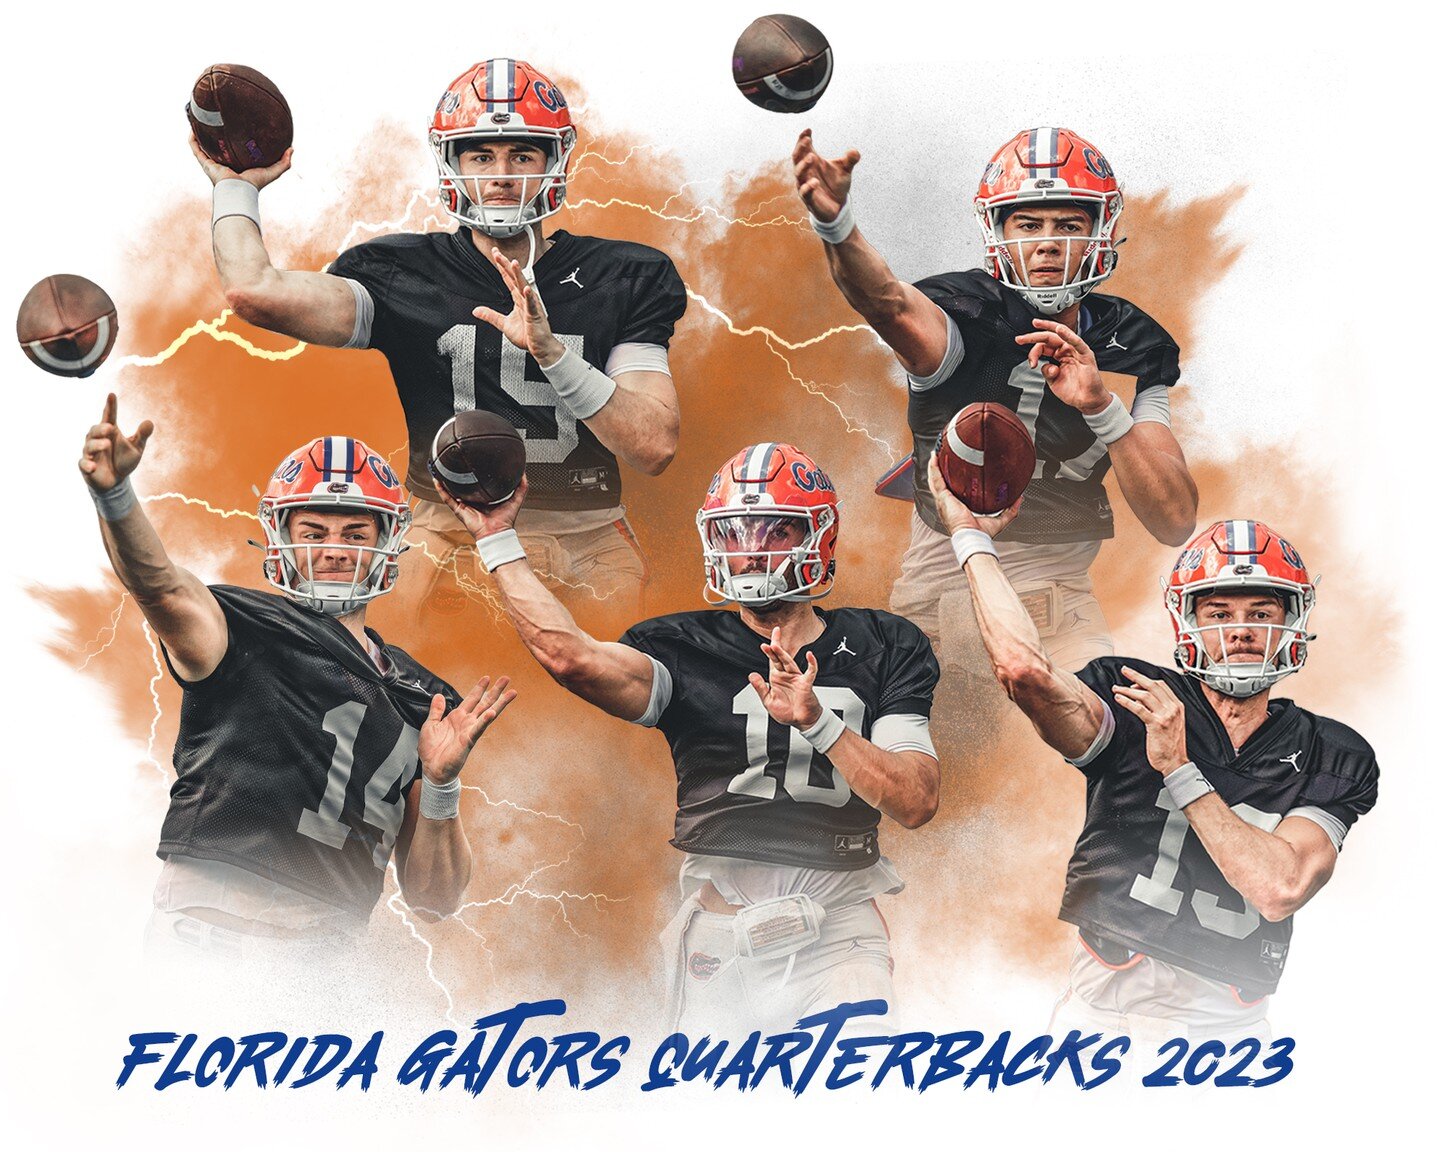 Anyone up for something different from @gatorsfb spring practice?? Let's give the photos from today a little something different #gators #gatorcountry #edits